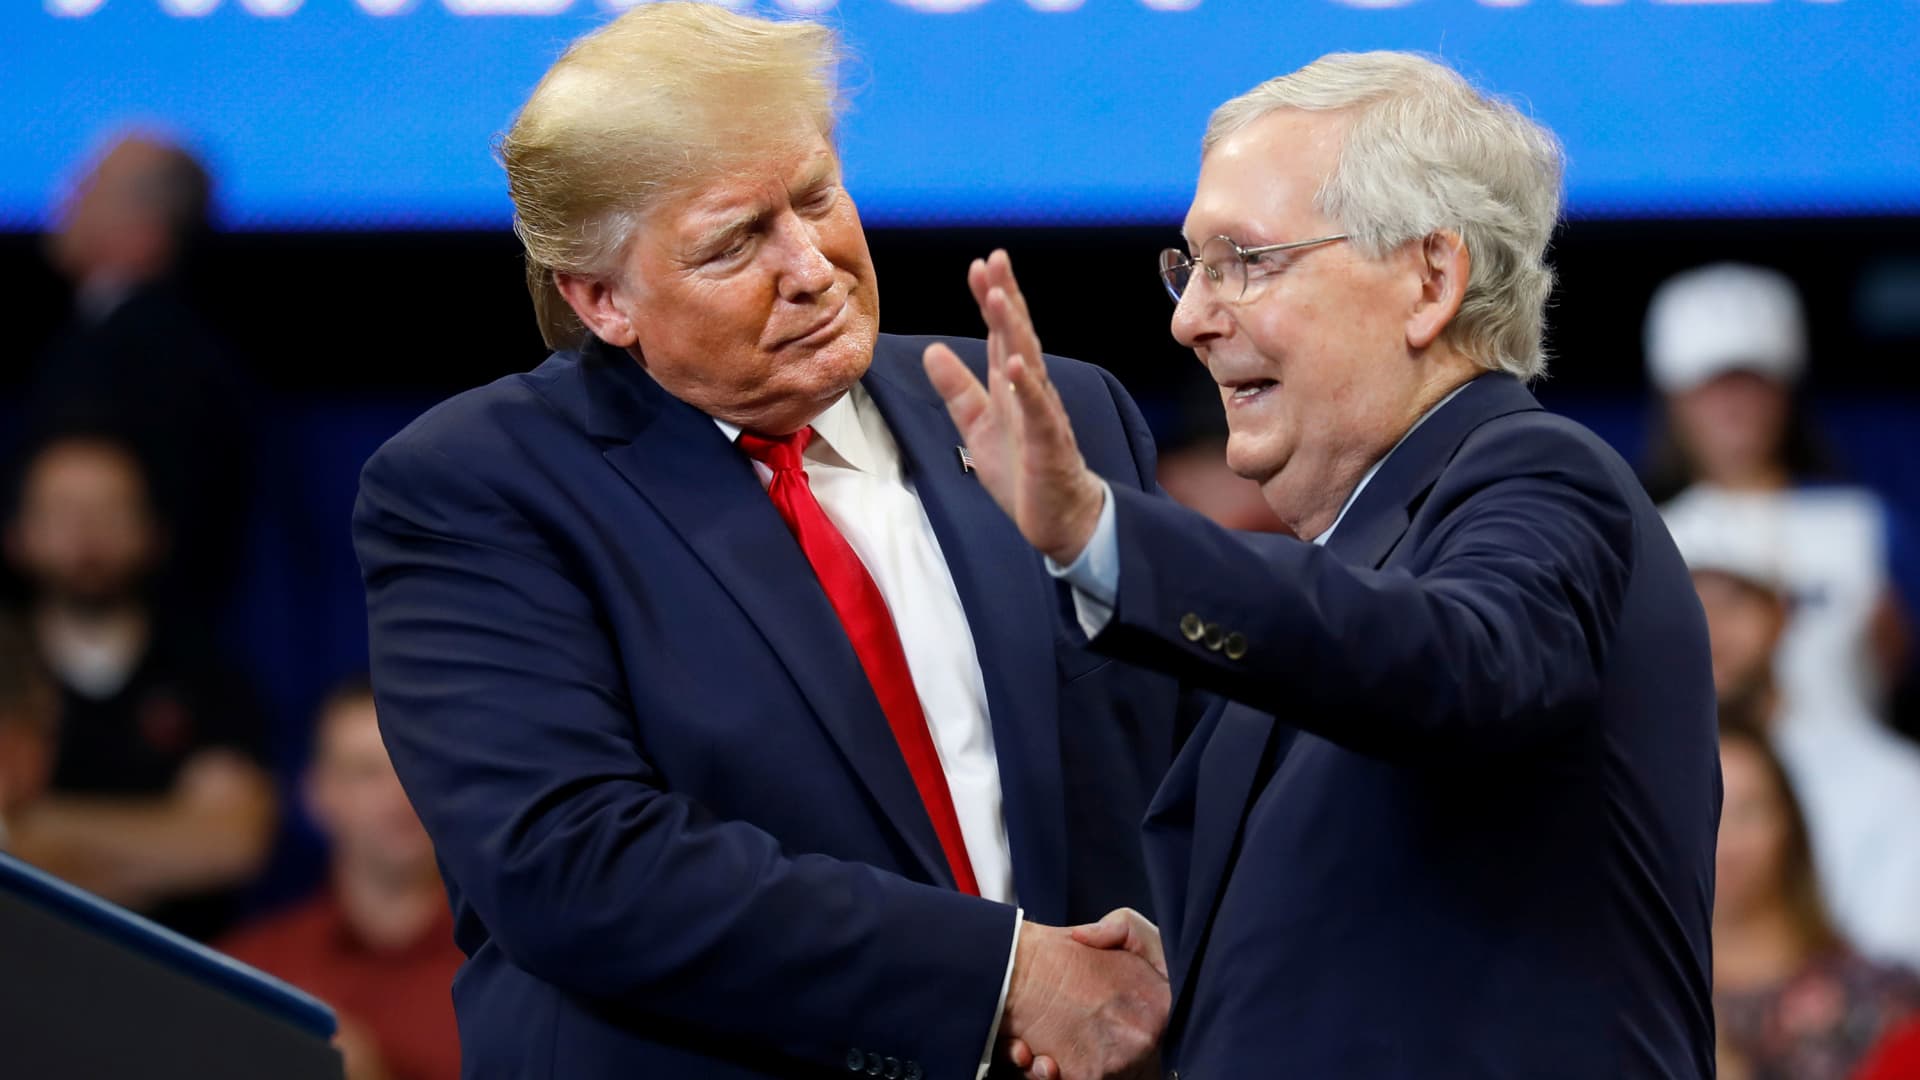 GOP billionaire donors direct cash to Senate leaders as Trump candidates lag Dems in fundraising